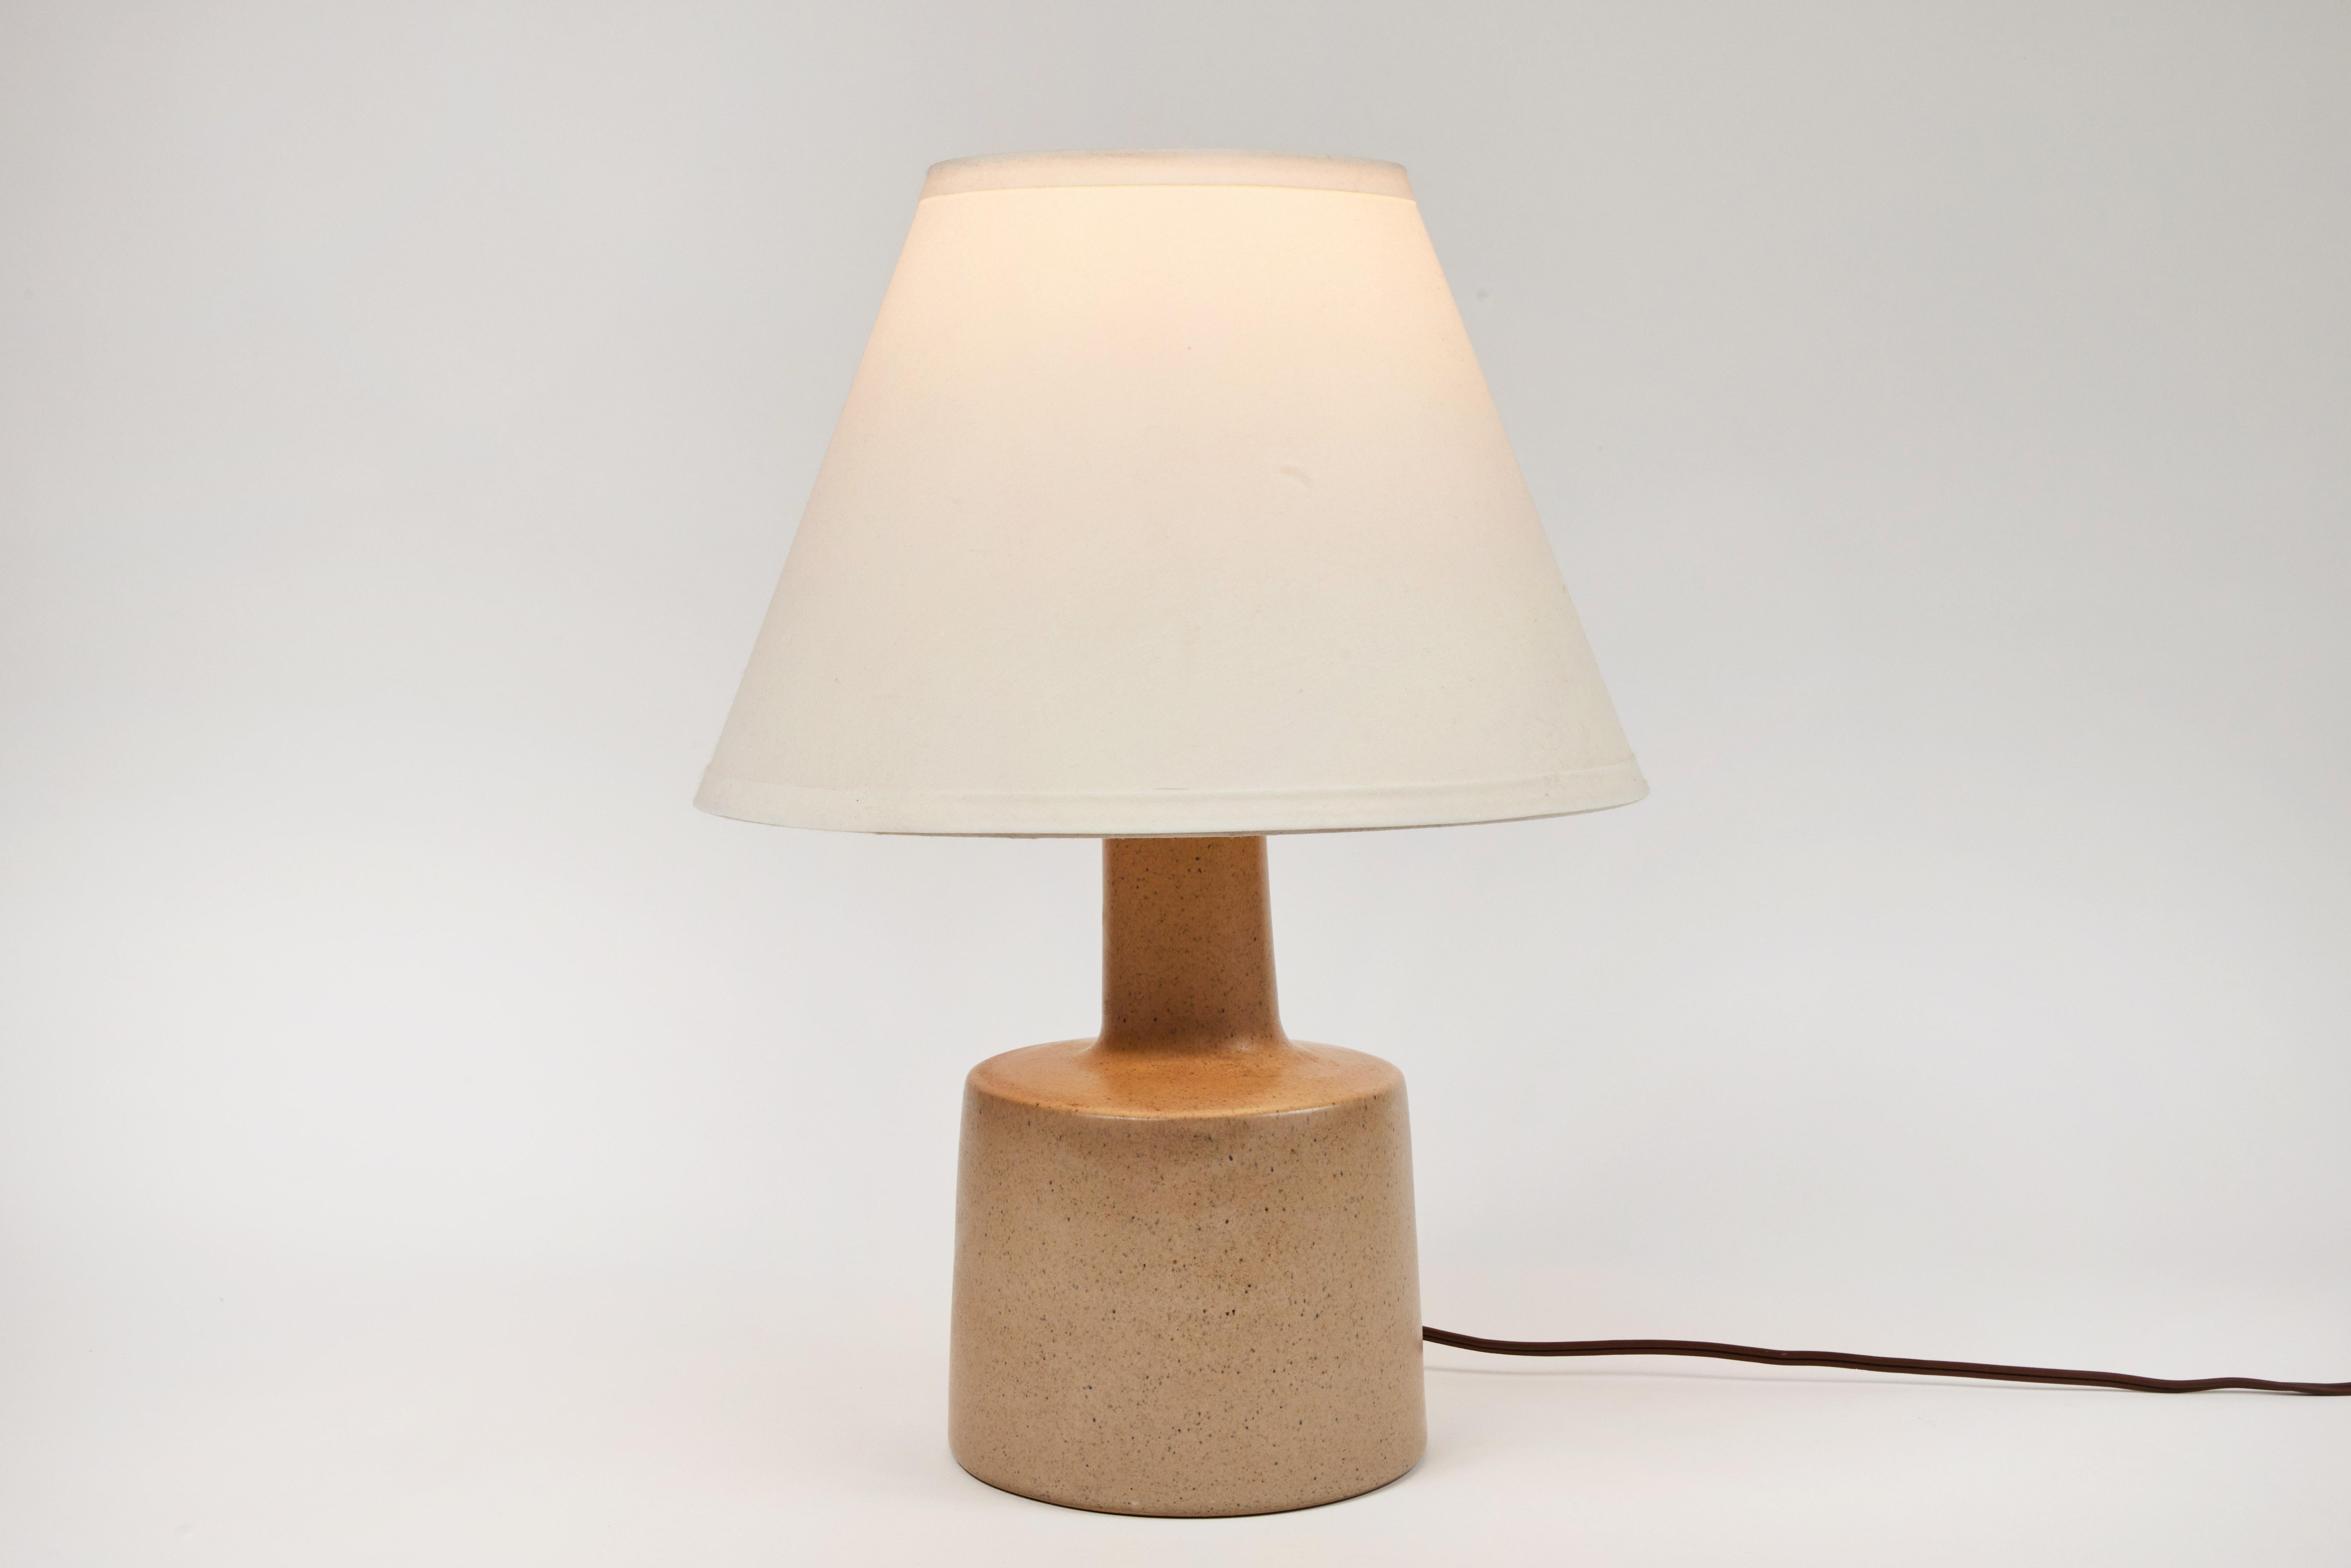 1950s Jane & Gordon Martz table lamp for Marshal Studios. Executed in ceramic with newer shades. Produced by Marshall Studios, Indianapolis, circa 1950s. An iconic example of midcentury Americana at its most refined. Signature in ceramic and both